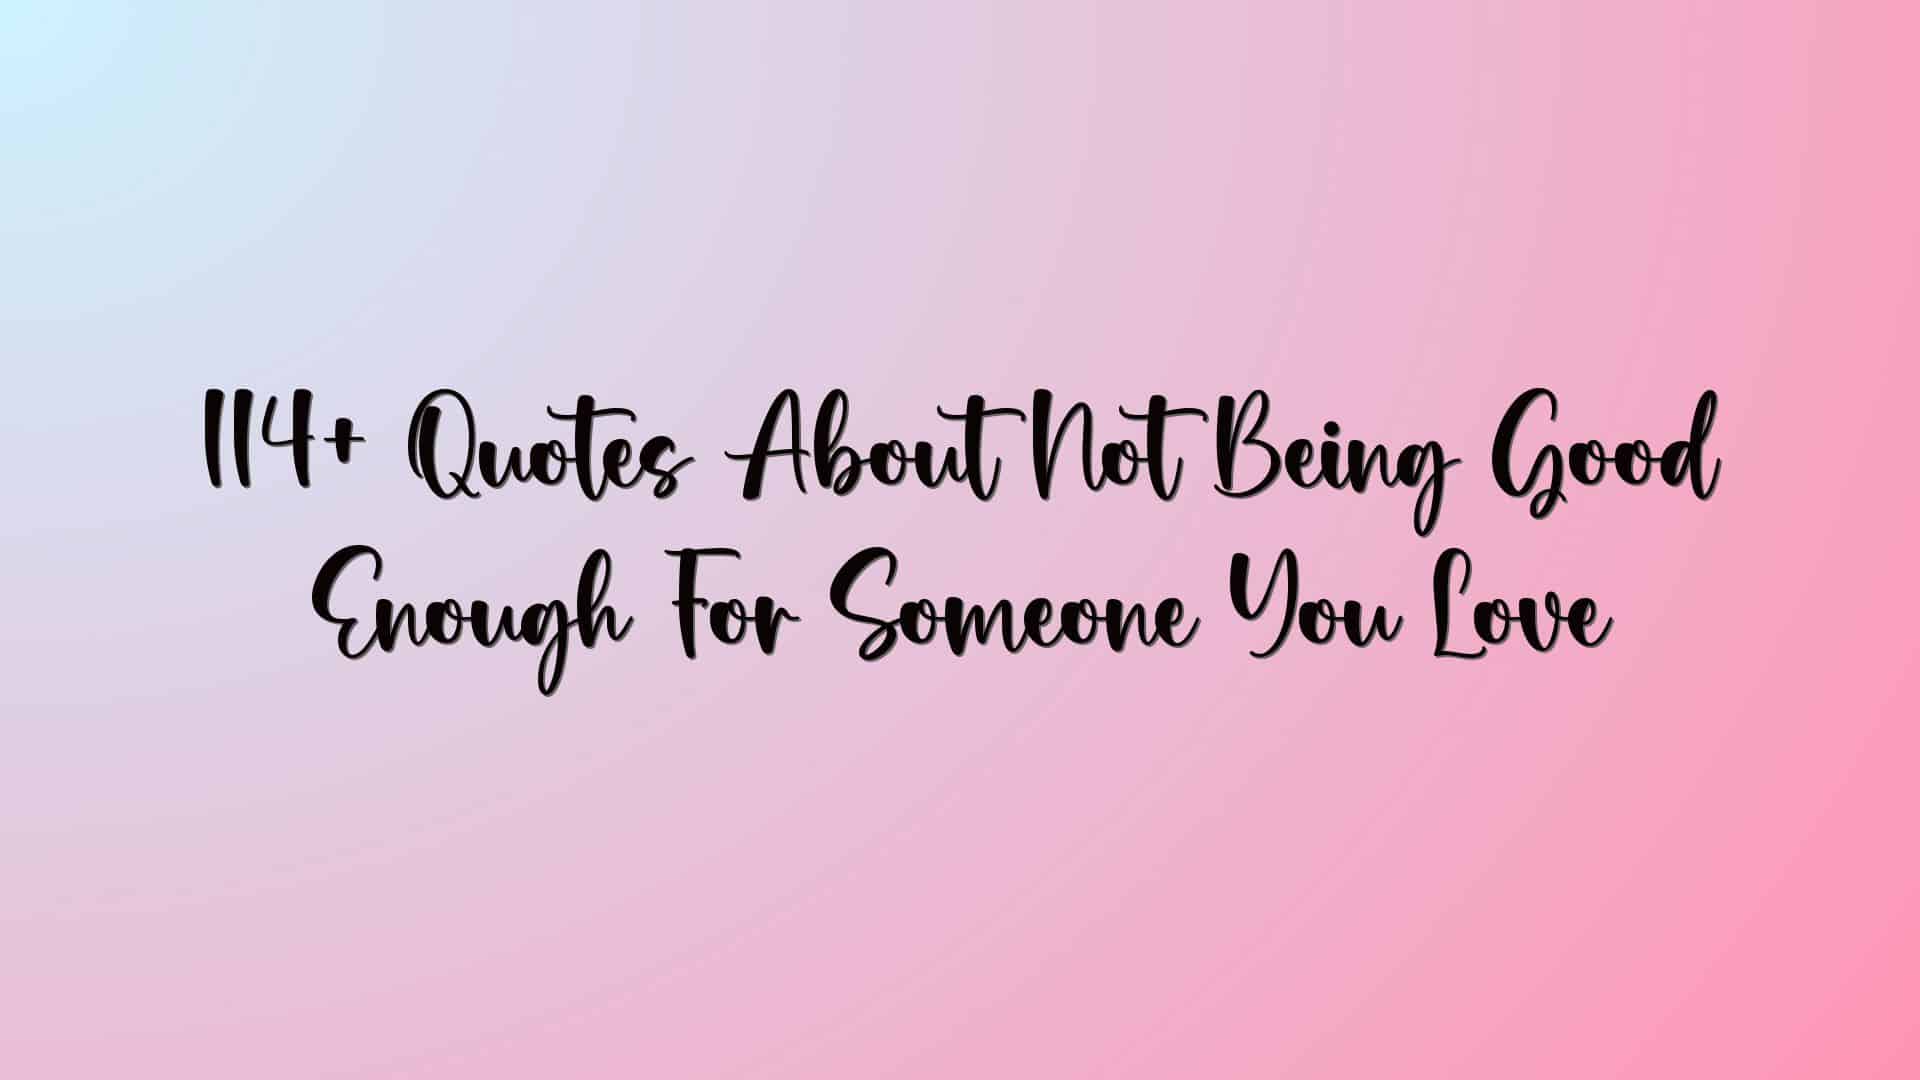 114+ Quotes About Not Being Good Enough For Someone You Love